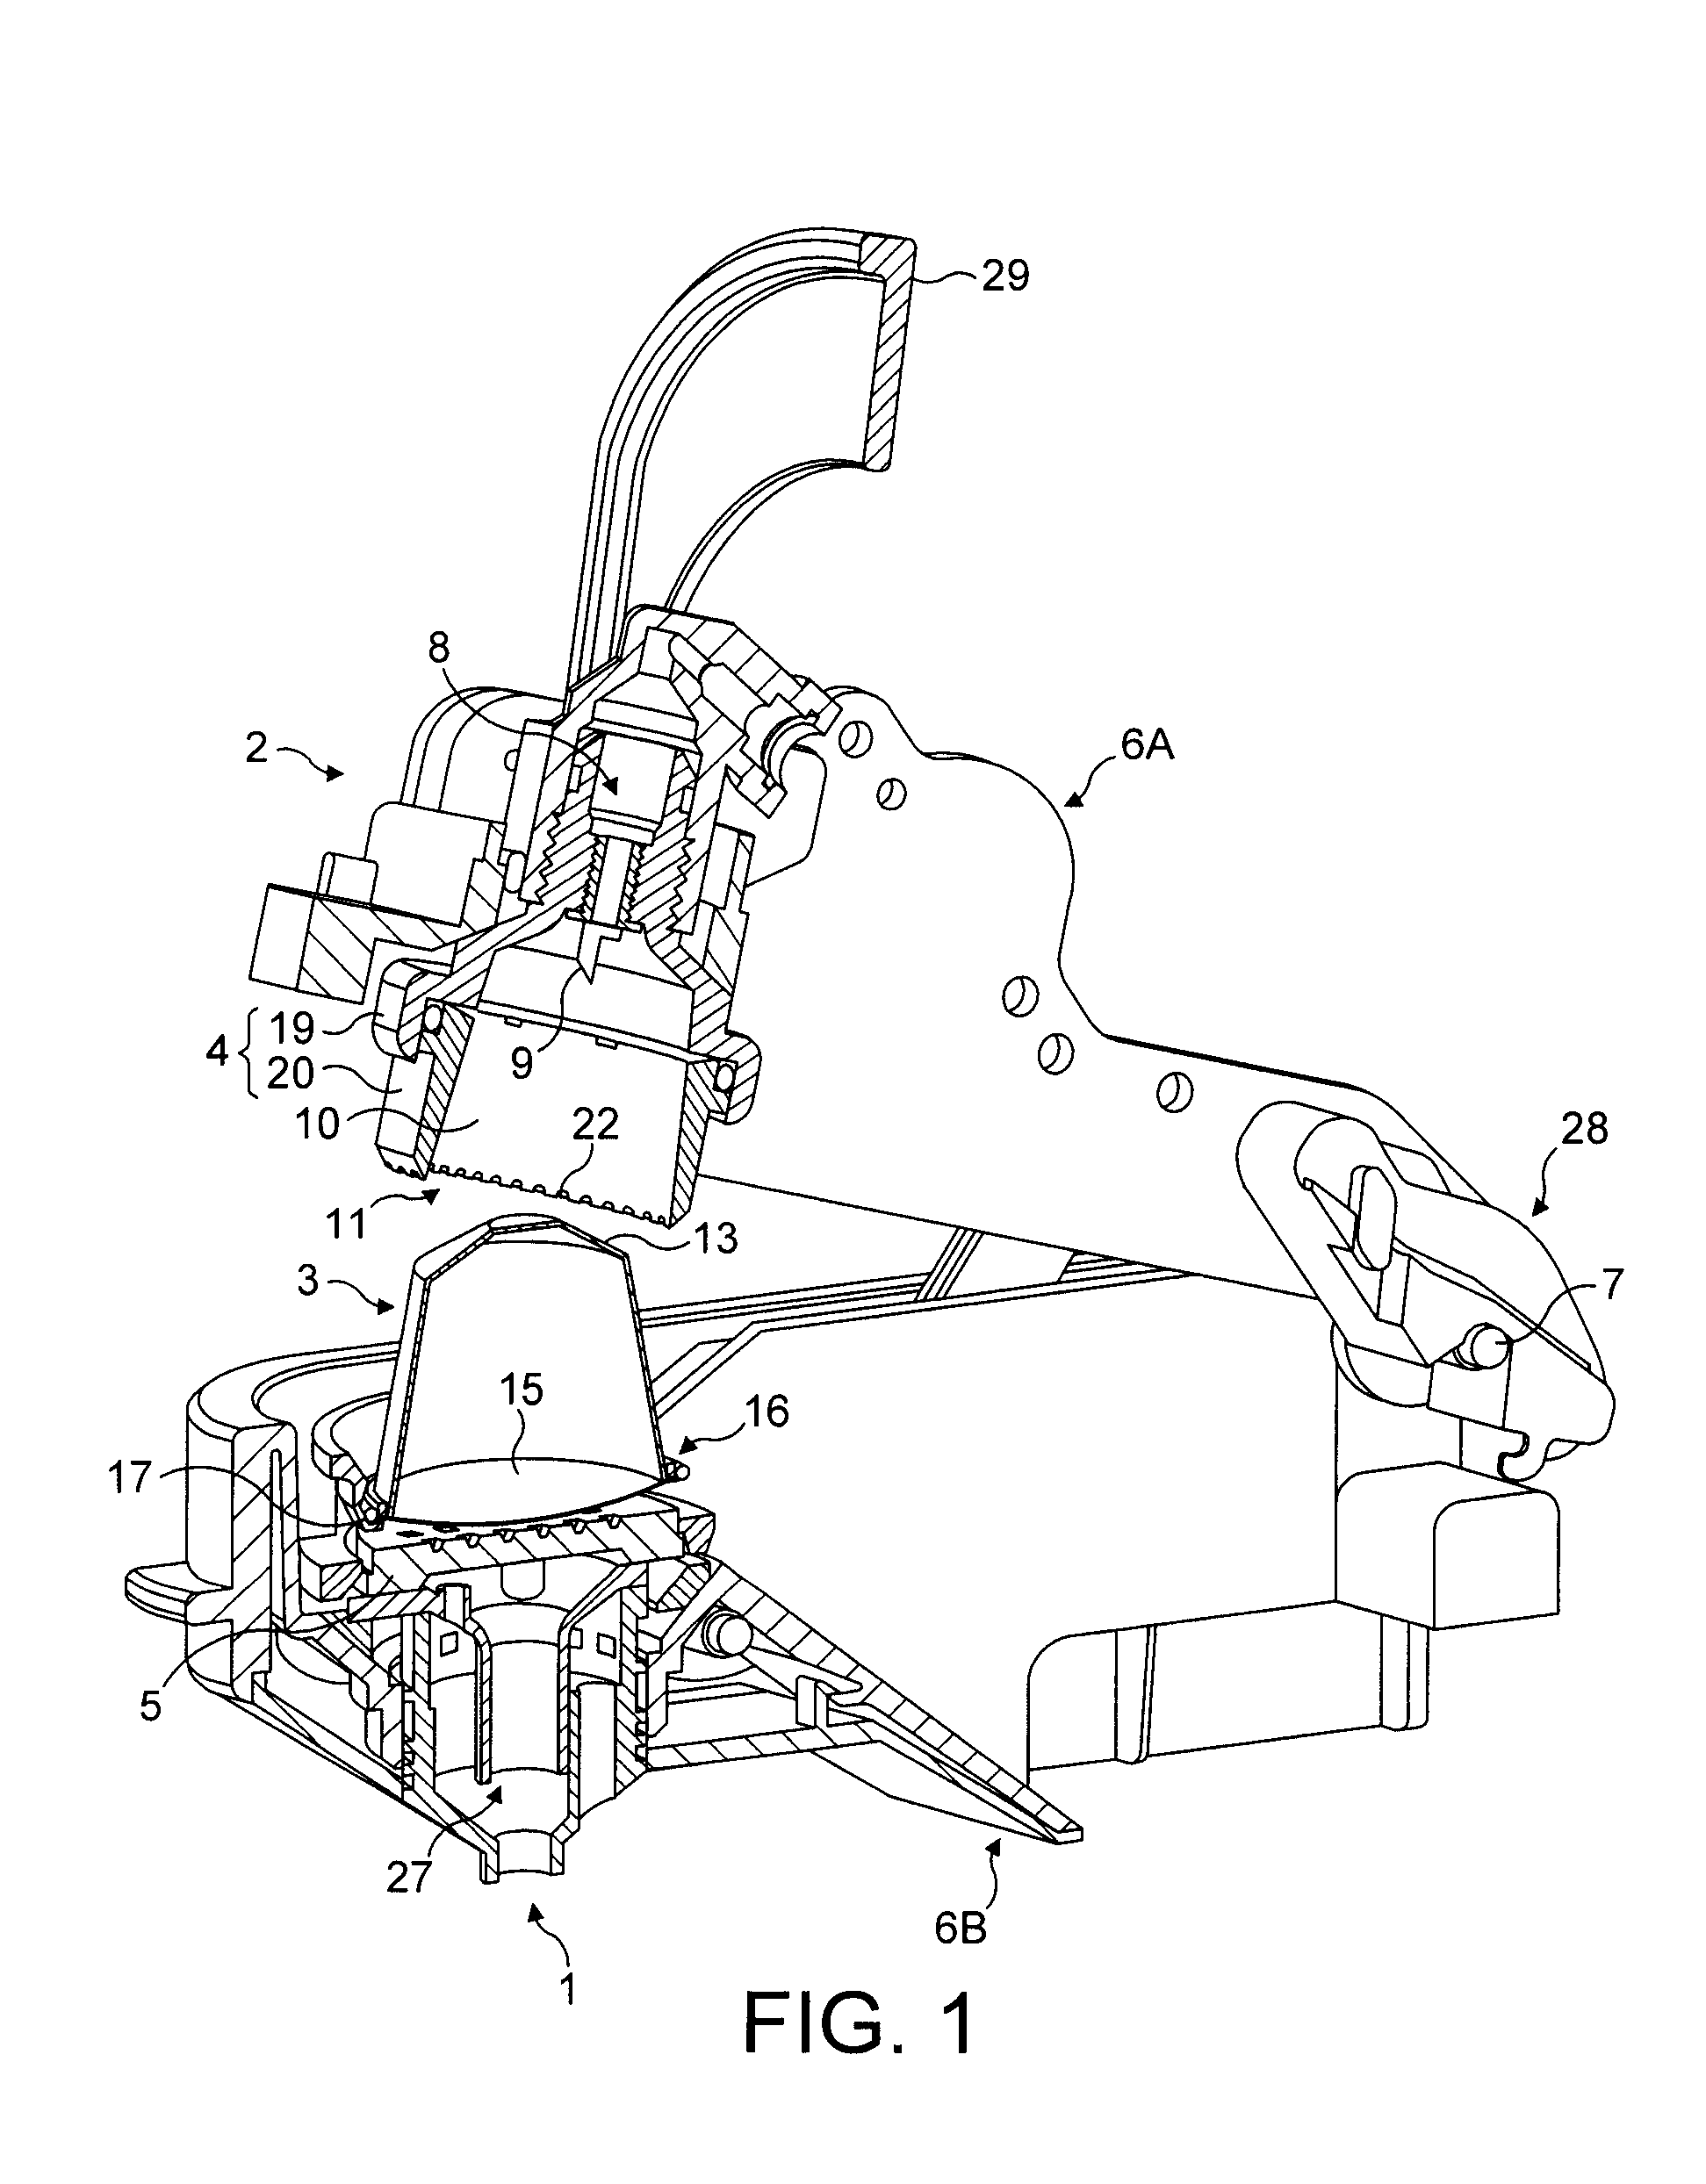 Sealing adapter for a beverage extraction system suitable for preparing a beverage from cartridges